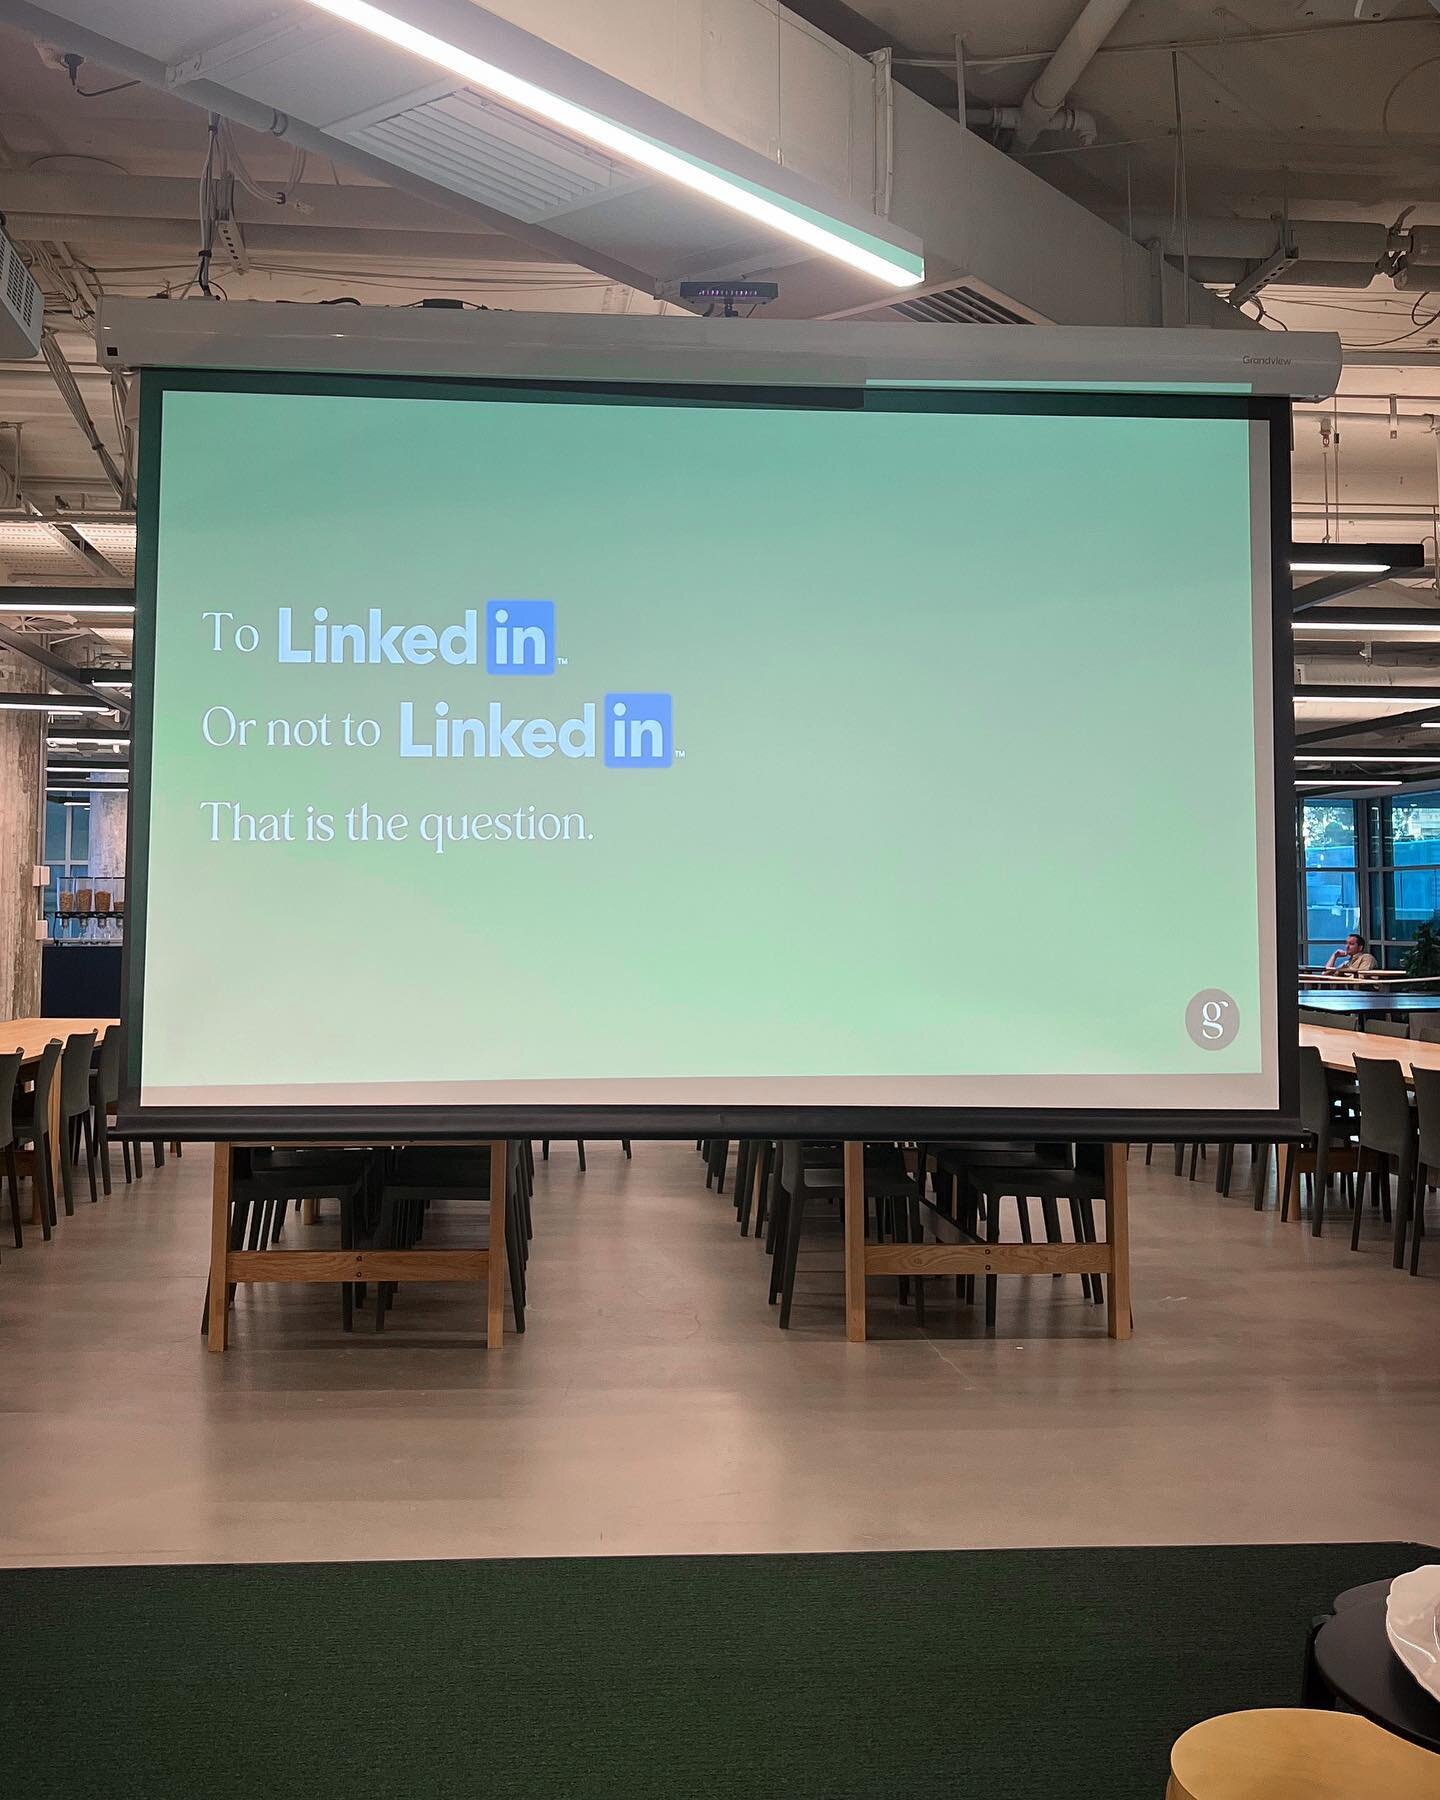 Level Up your LinkedIn masterclass with @thecommons yesterday! 

In 60 mins we discussed:
💙 How to conduct a profile audit
🩵 How often you need to be turning up on LinkedIn
💙 What parts of your profile are the most important 
🩵 The LinkedIn algor